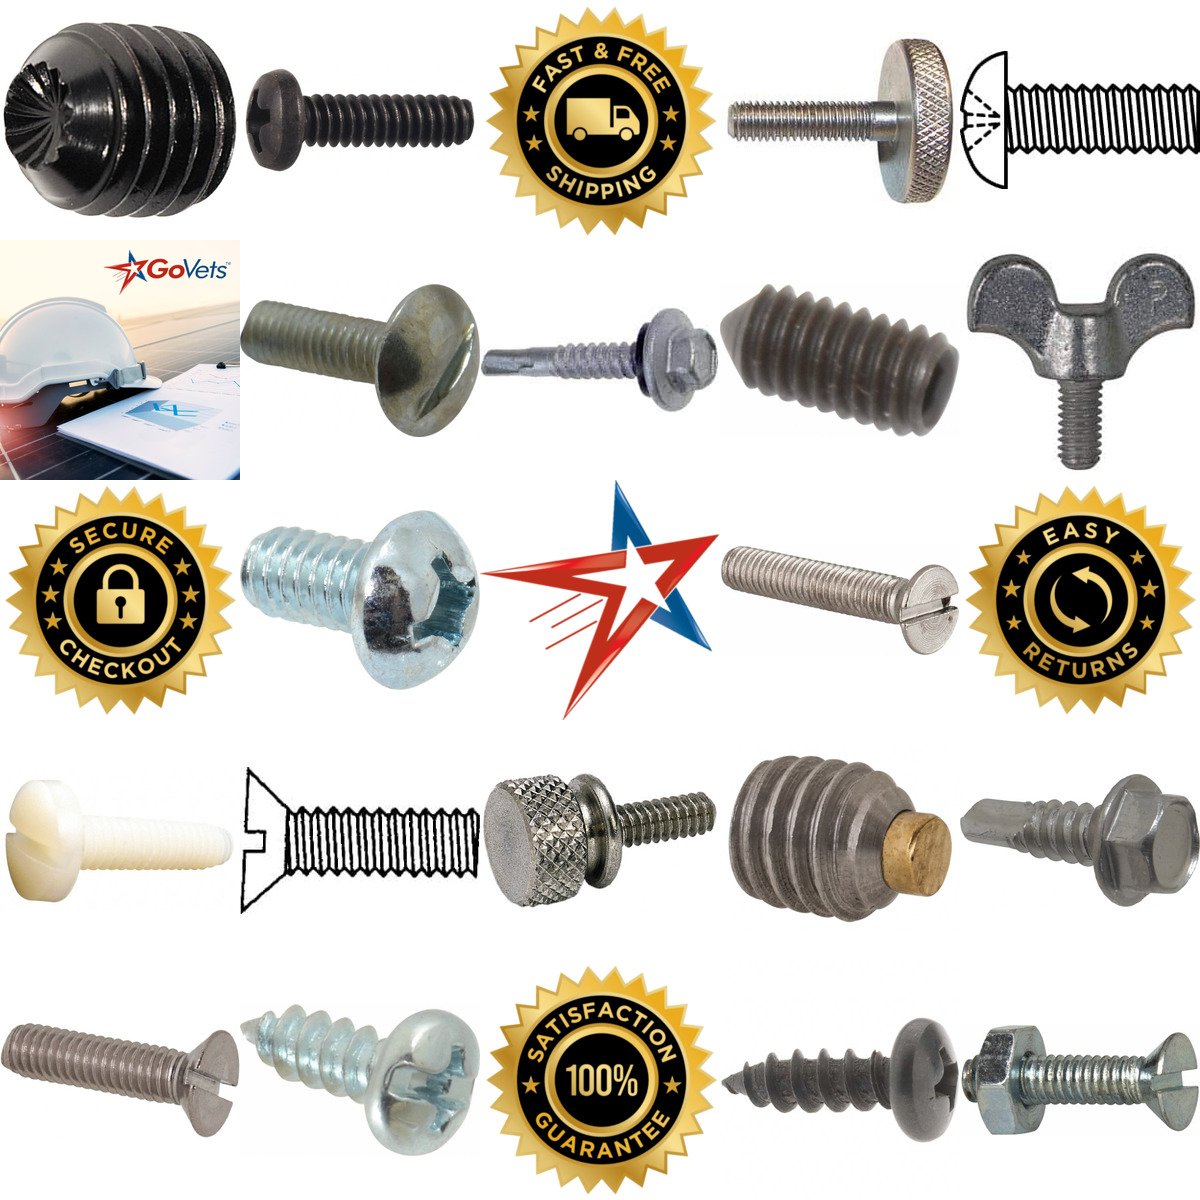 A selection of Screws products on GoVets